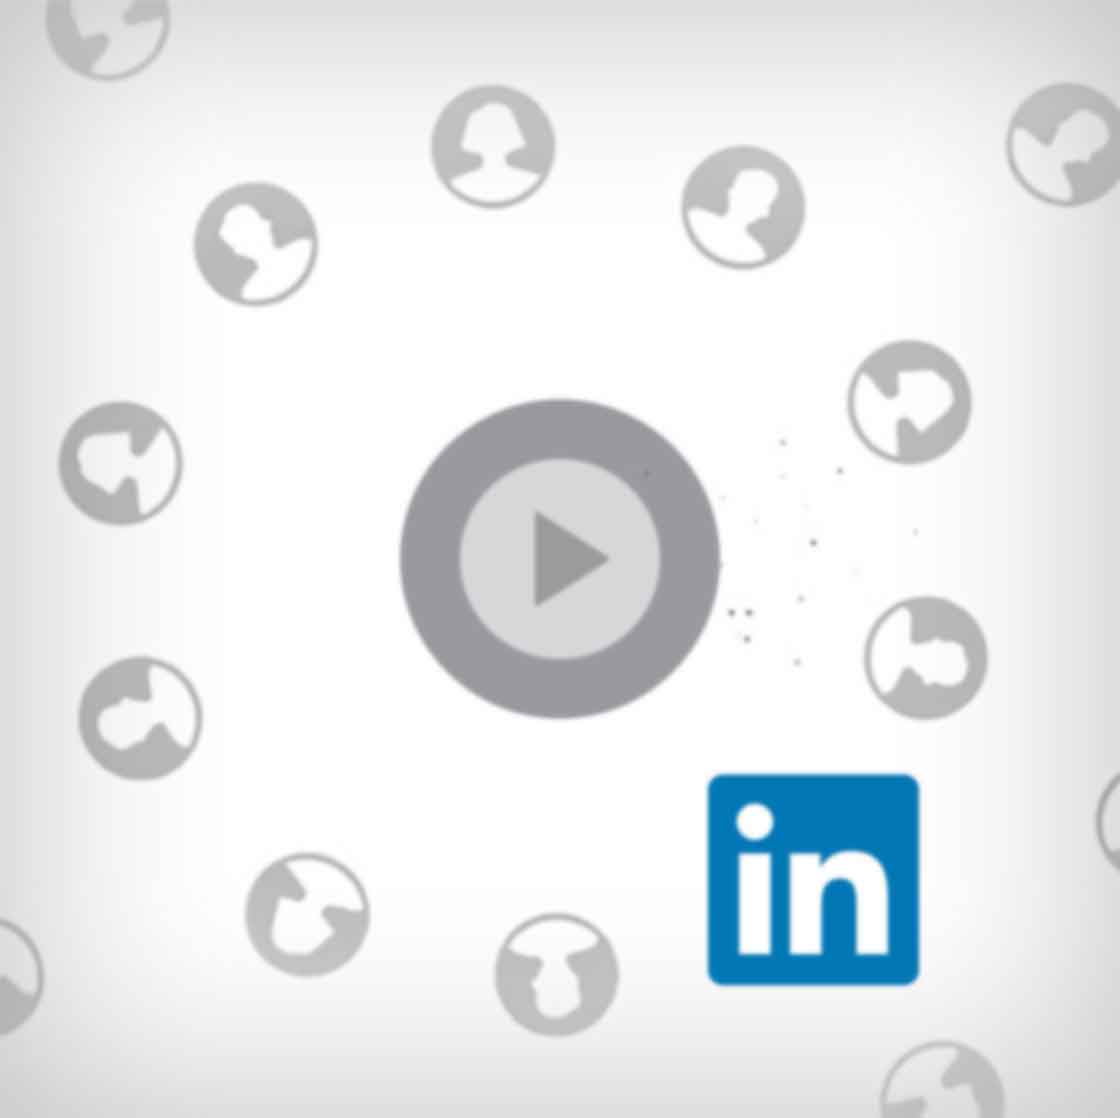 Product marketing for Linkedin